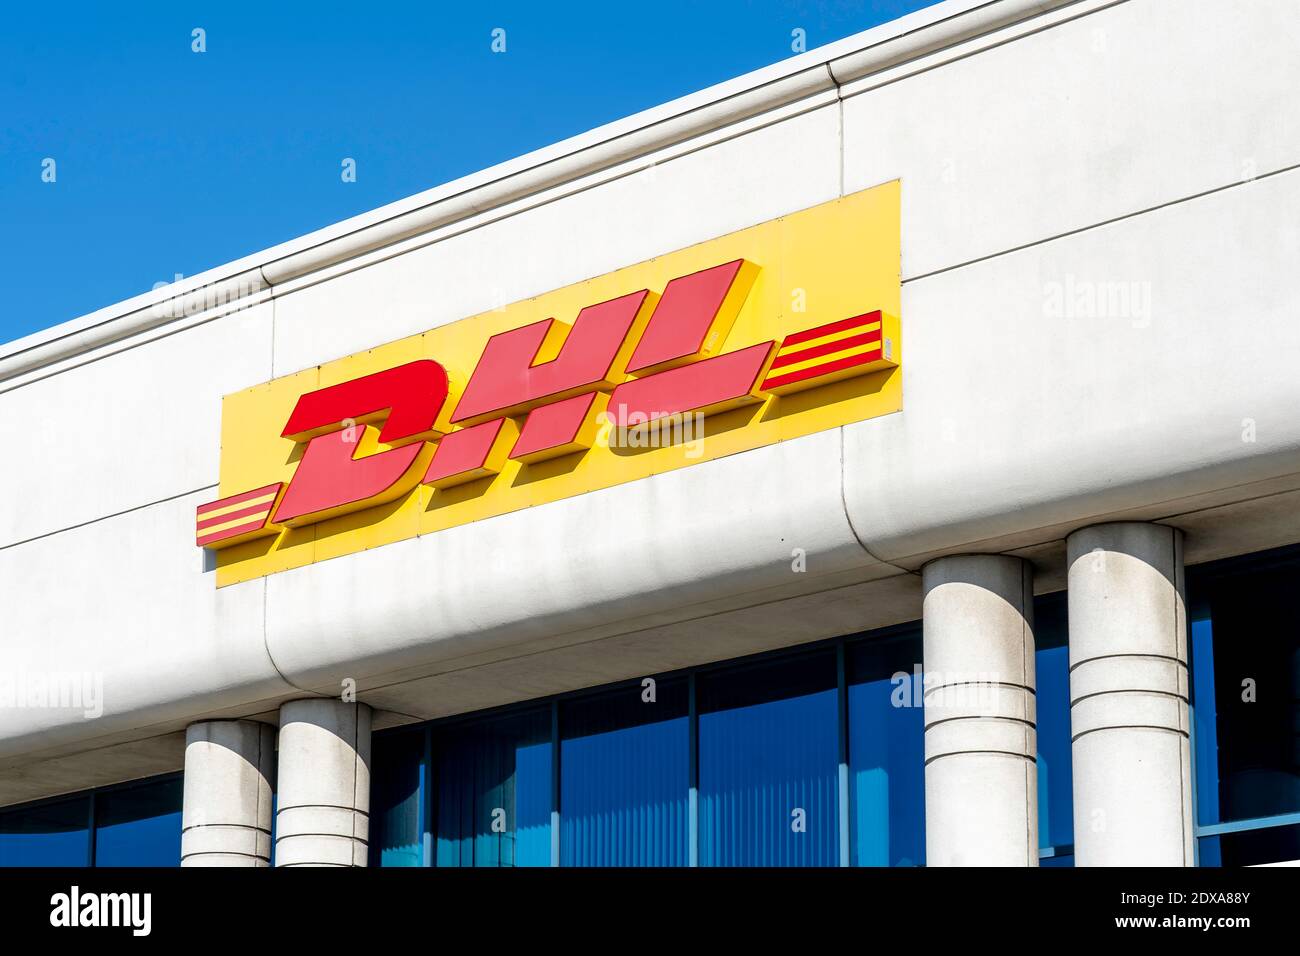 Mississauga, Ontario, Canada - October 23, 2019: Sign of DHL Global Forwarding on the building in Mississauga, Ontario, Canada. Stock Photo